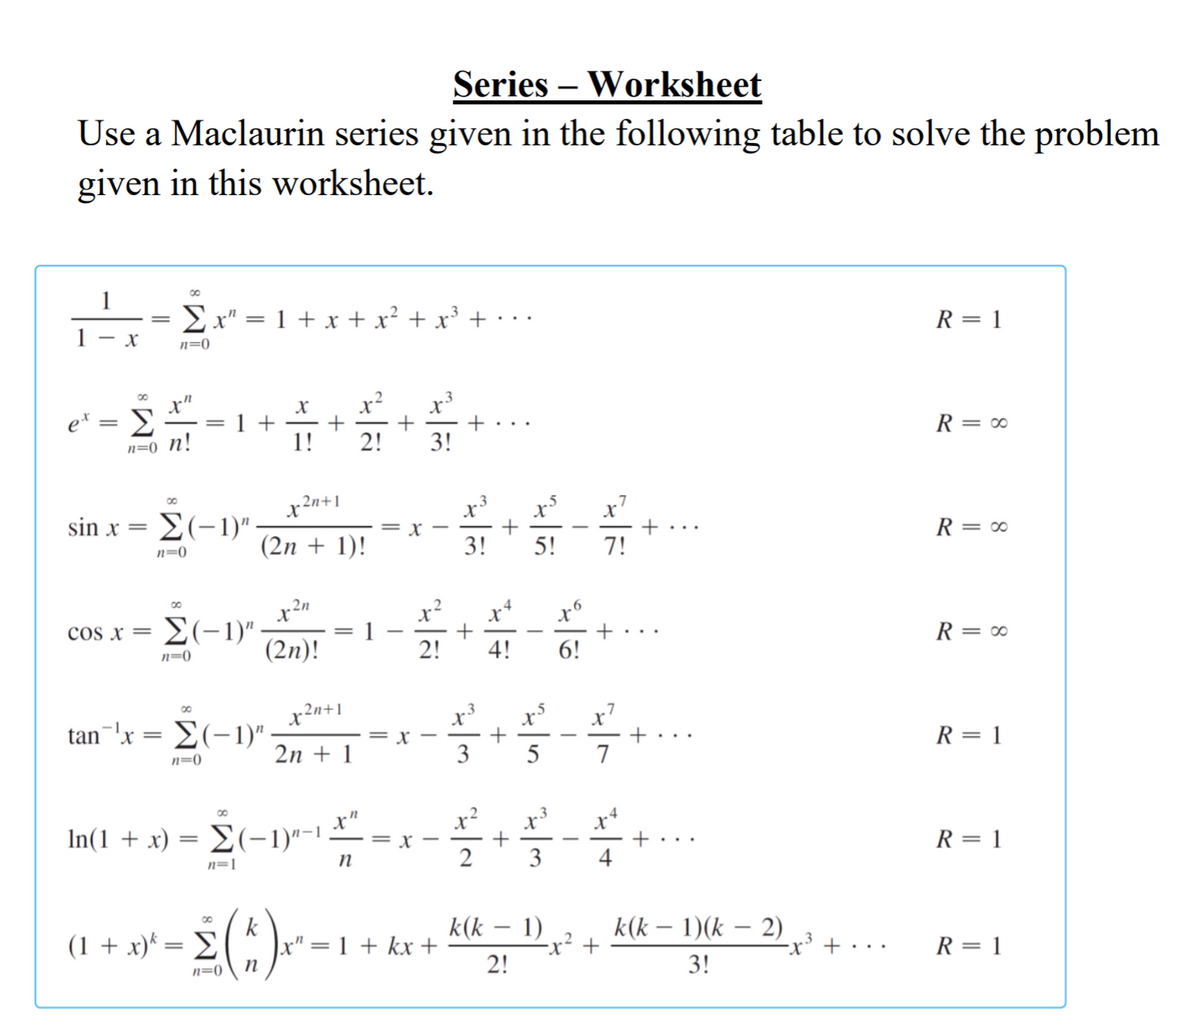 Series – Worksheet
Use a Maclaurin series given in the following table to solve the problem
given in this worksheet.
1
Ex" = 1 + x + x² + x³ +
R = 1
..
- X
n=0
x"
e* = E
n=0_n!
x²
+
2!
1 +
R = ∞
||
1!
3!
x2n+1
x
x7
sin x
E(-1)".
R = 0
= r
(2n + 1)!
3!
5!
7!
n=0
00
2n
x*
E(-1)":
1
2!
cos x =
R = 0
n=0
(2n)!
4!
6!
x'
+
7
x2n+1
tan-'x = E(-1)" -
2n + 1
R = 1
3
5
n=0
x?
x*
In(1 + x) = E(-1)"-1
R = 1
= X
+...
-
n
3
4
n=1
k(k – 1)
-x² +
2!
(1 + x)* = E
k
x" = 1 + kx +
k(k – 1)(k – 2)
-x' + · · ·
R = 1
3!
n=0
+
+
